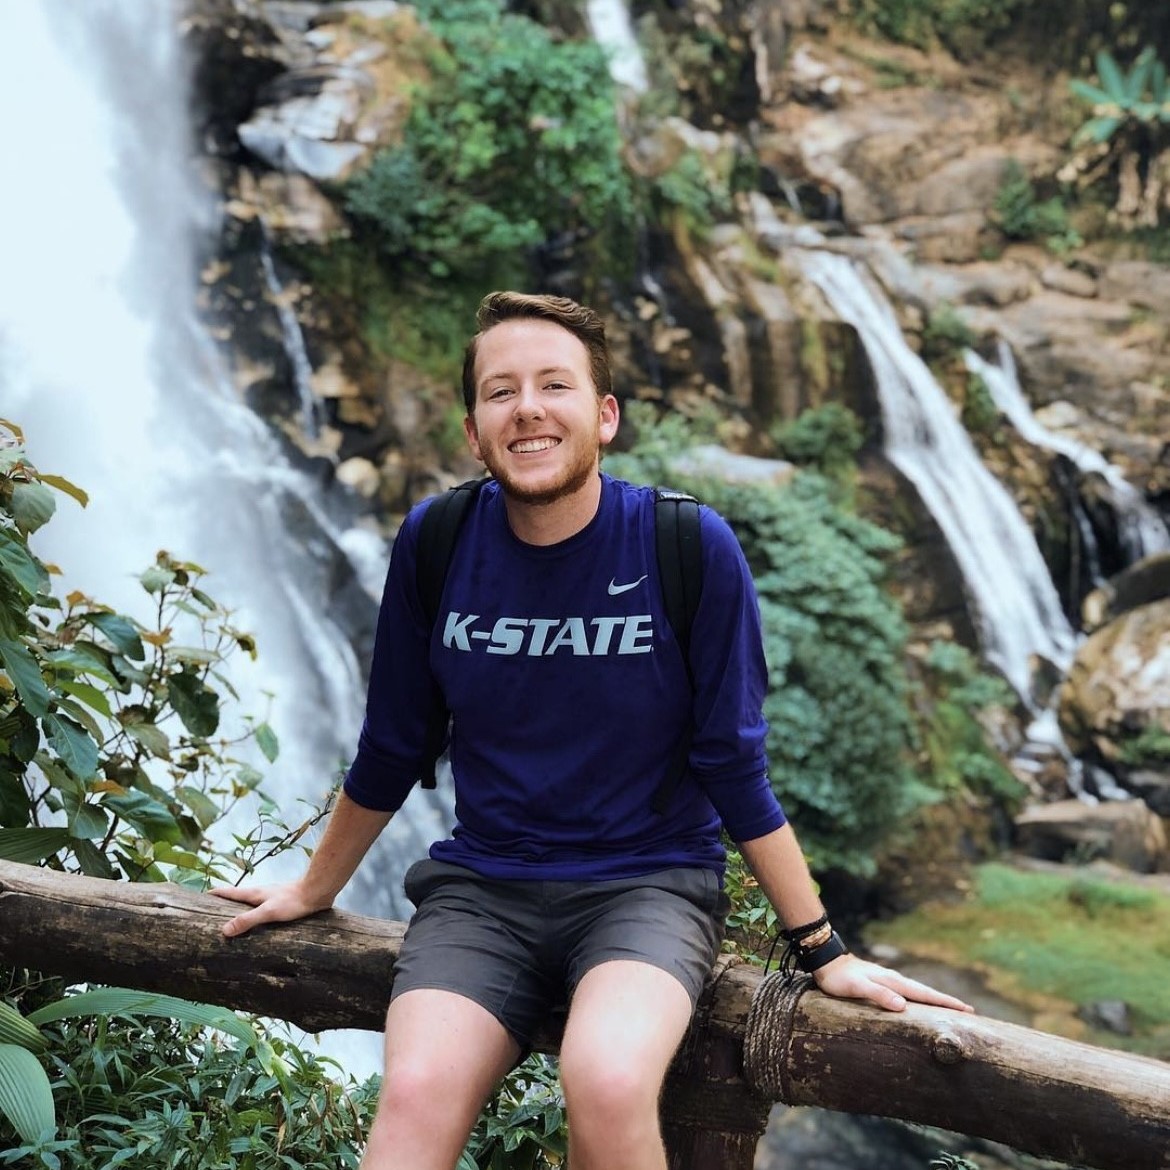 K-State student studying abroad in Thailand